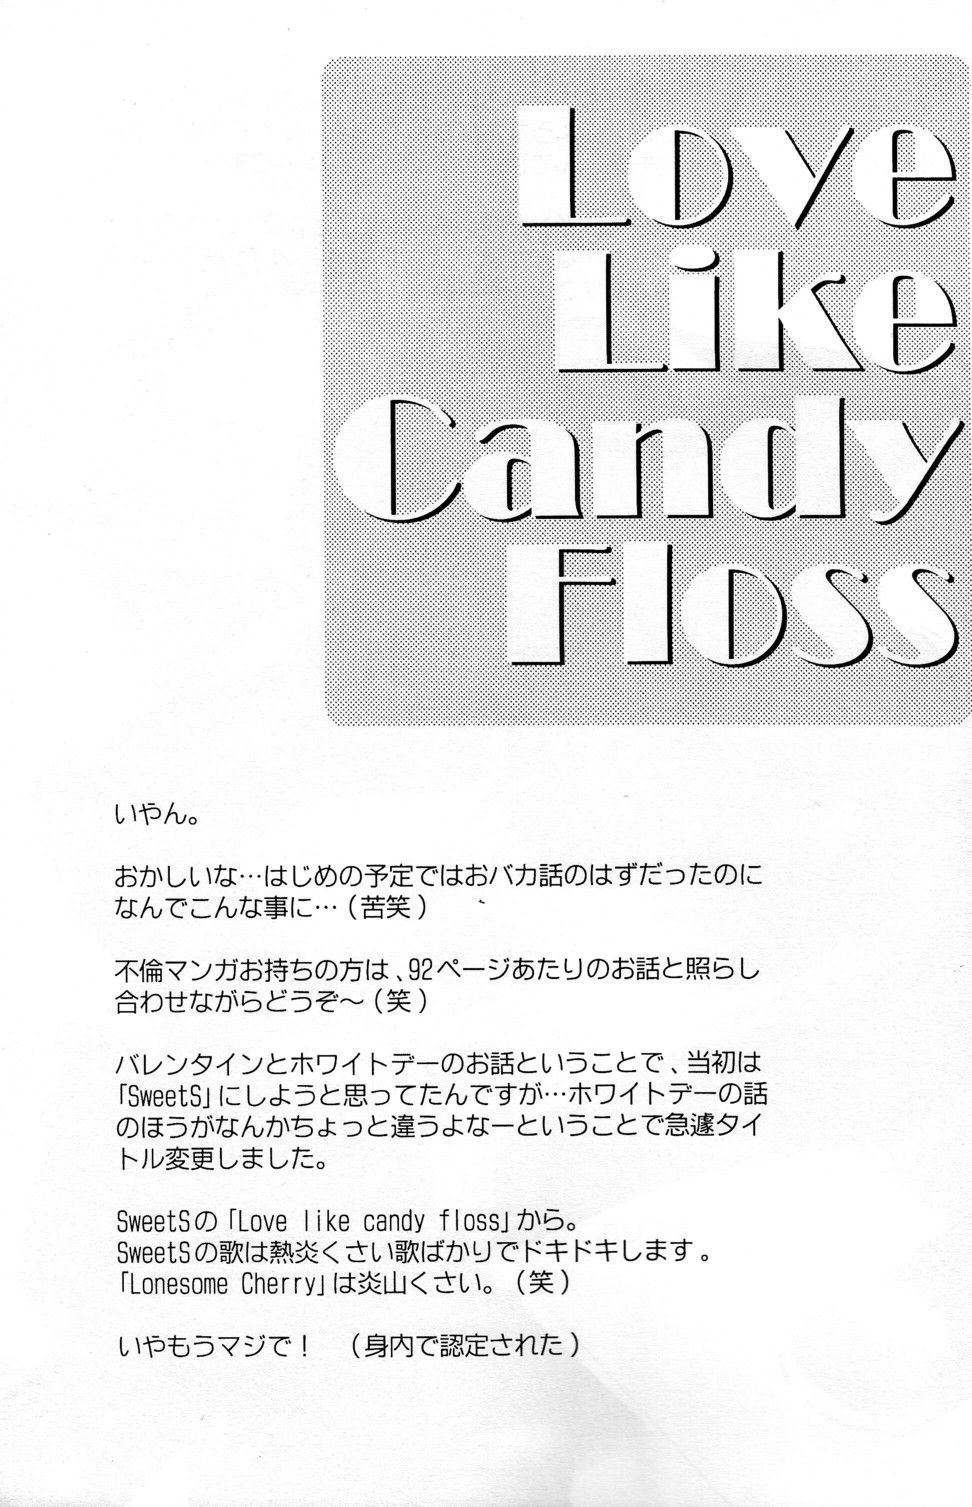 [C-Mania (本城リカ)] Love Like Candy Floss (ロックマンエグゼ) [英訳]